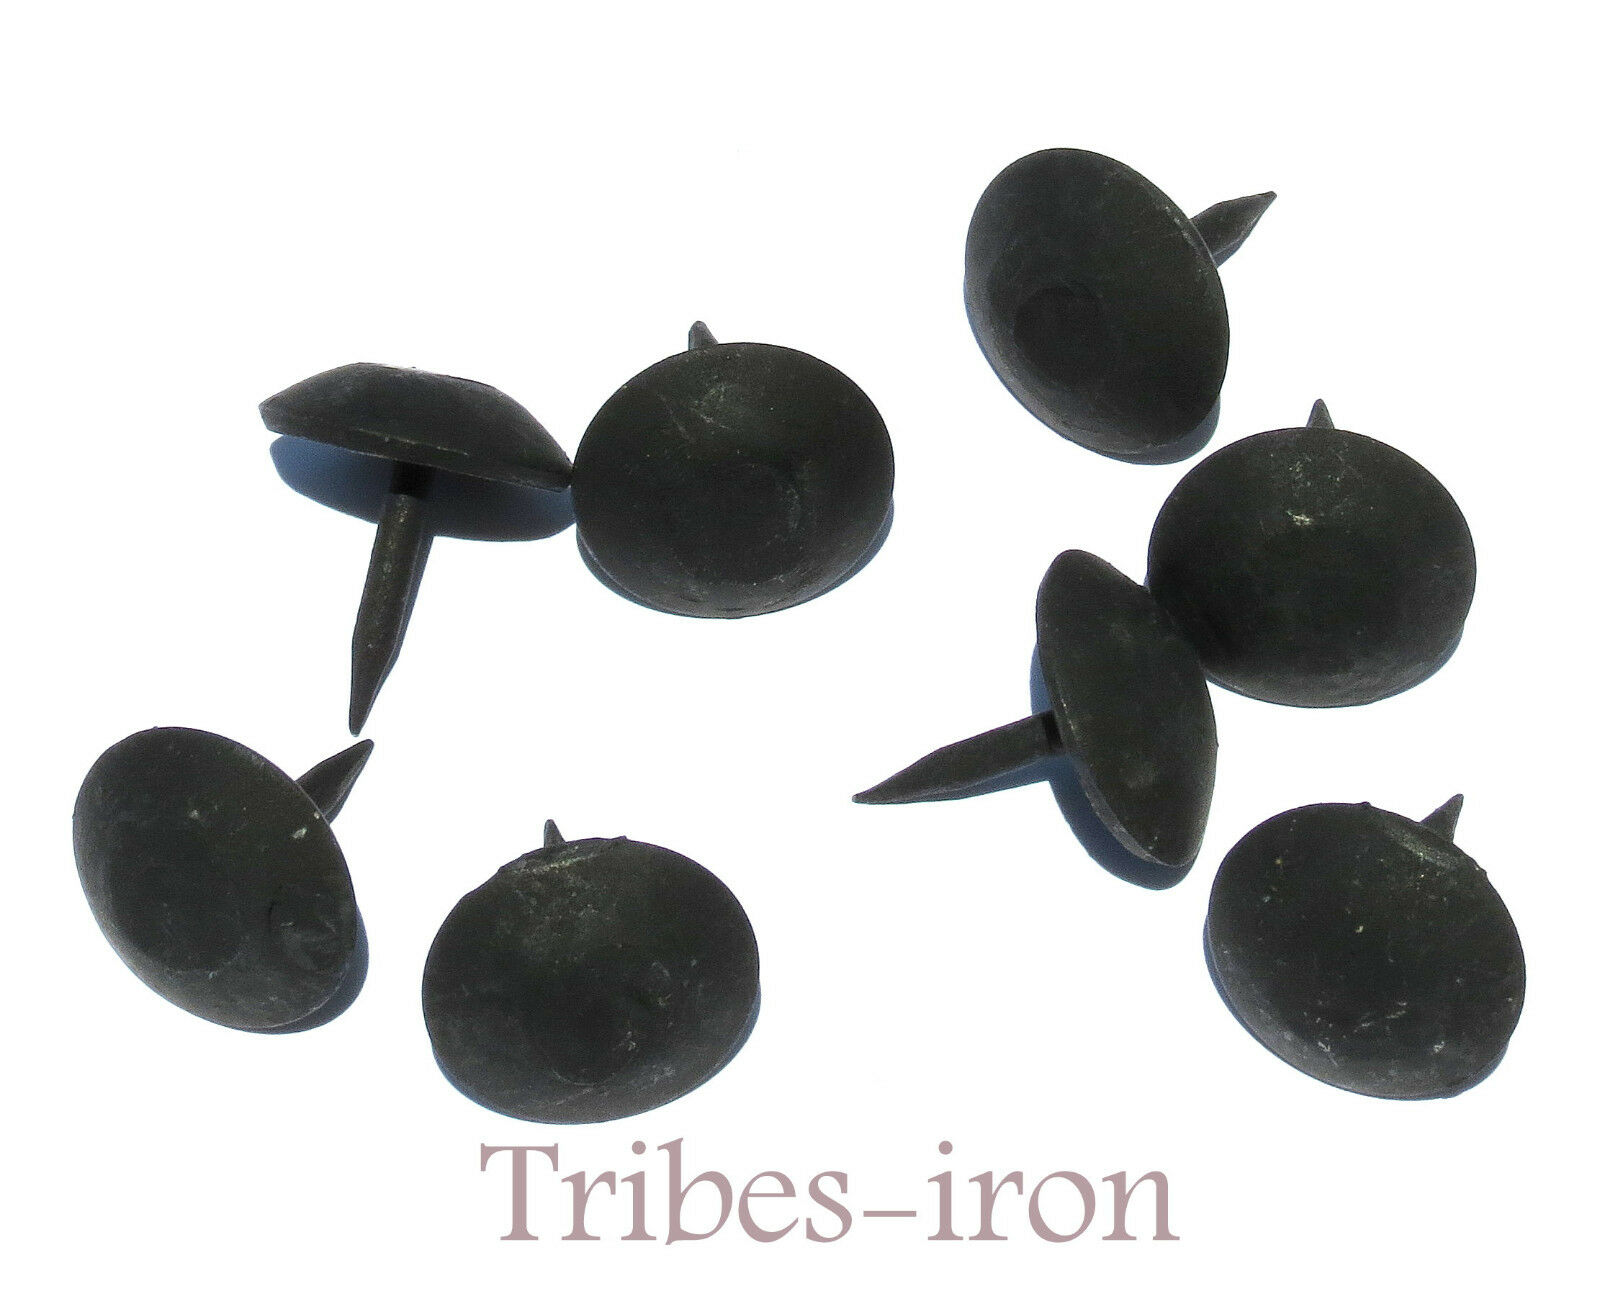 60 Black Clavos 1" Round Head Nails Forge Wrought Iron Furniture Door Decor Stud